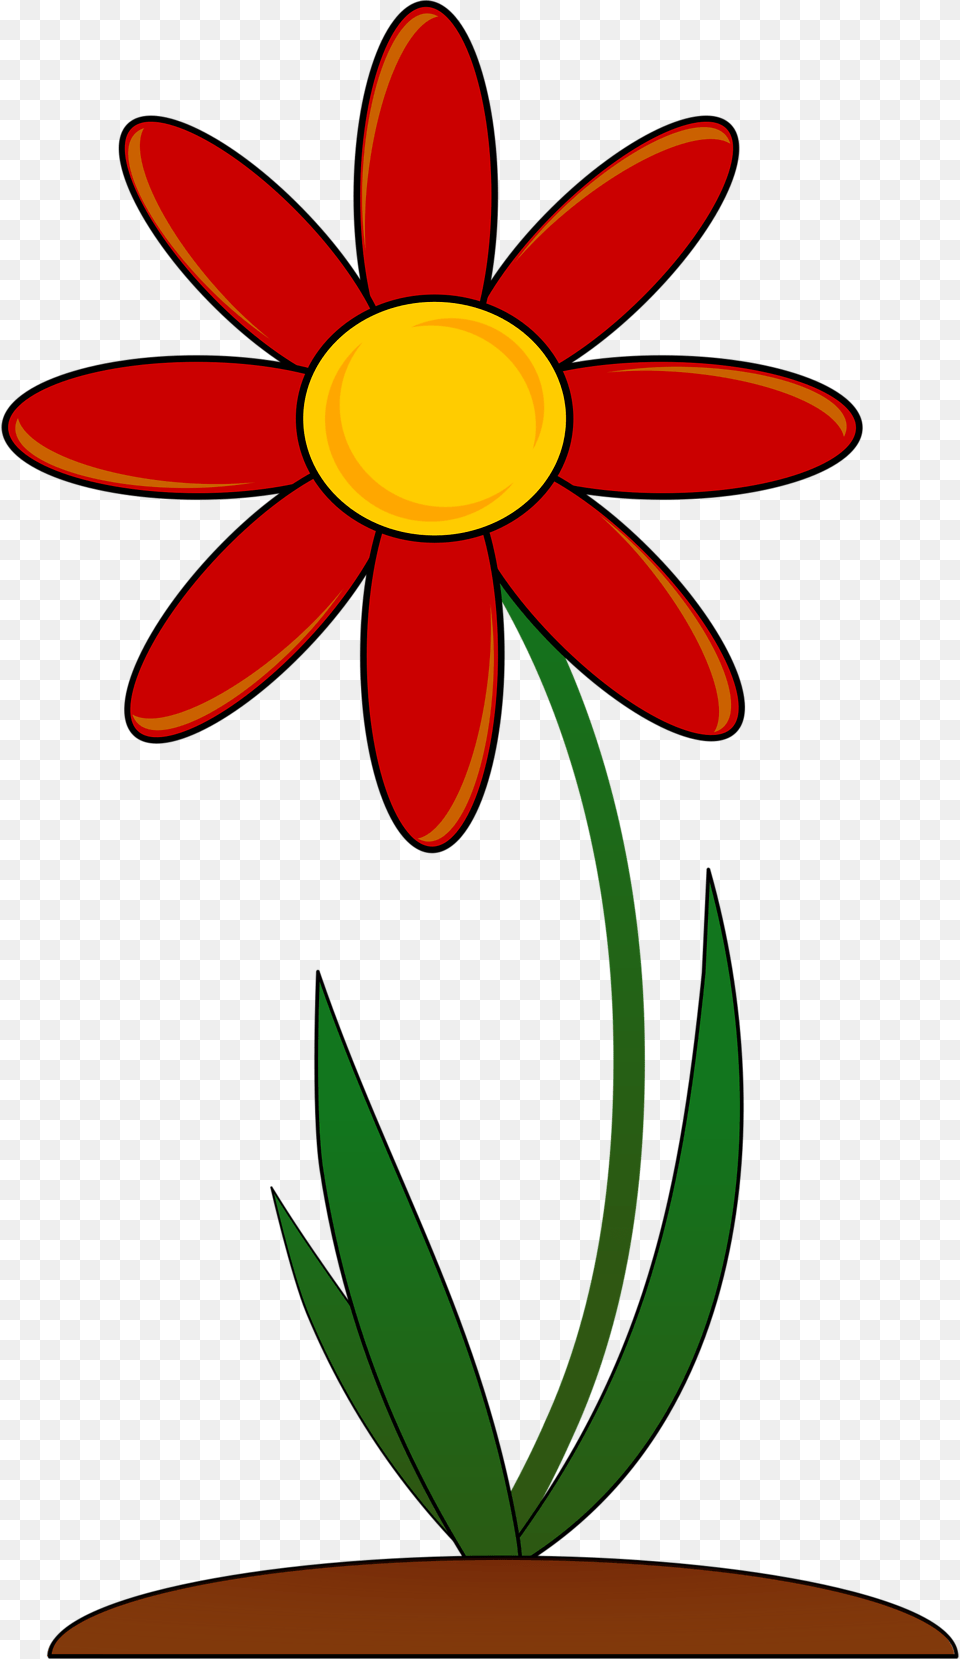 Flower Red Stock Photo Illustration Of A Red Flower, Daisy, Plant, Petal, Cross Free Transparent Png